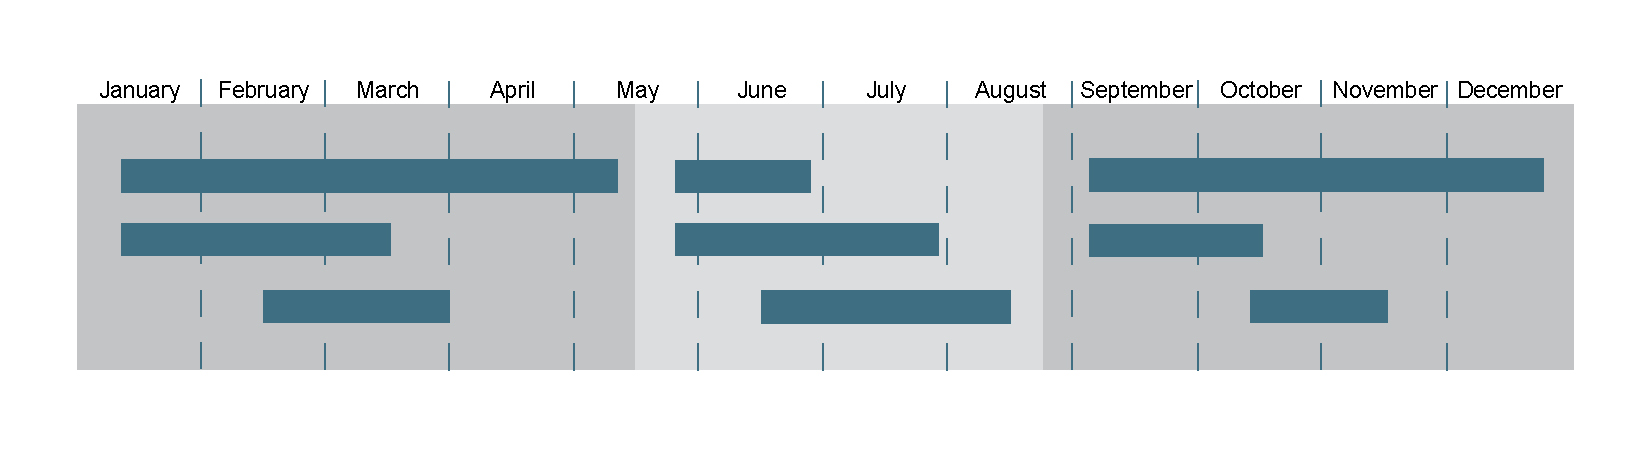 Graphic displaying regular and modular sessions within a calendar year.